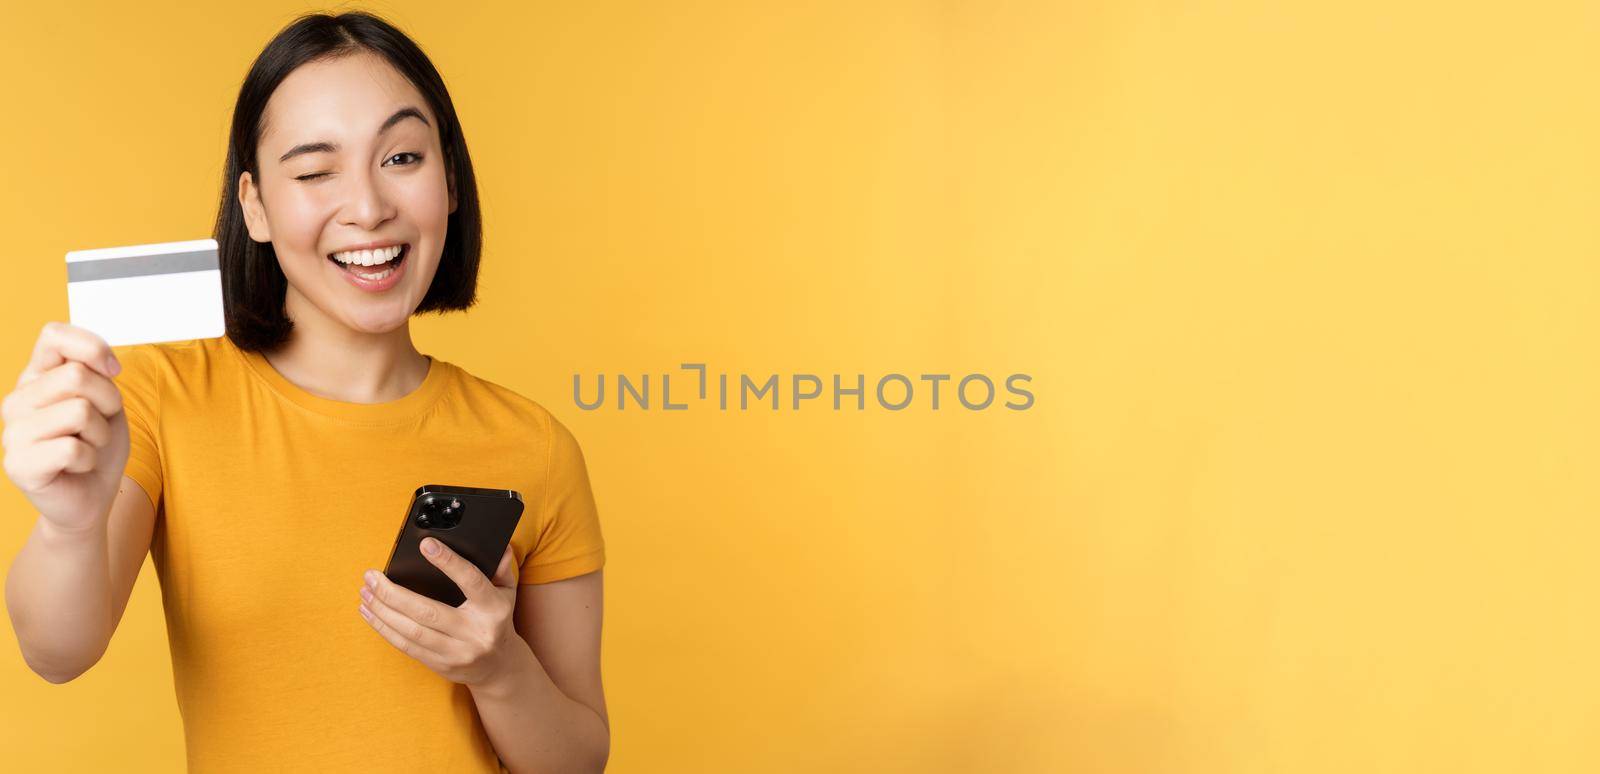 Joyful asian girl smiling, showing credit card and smartphone, recommending mobile phone banking, standing against yellow background.